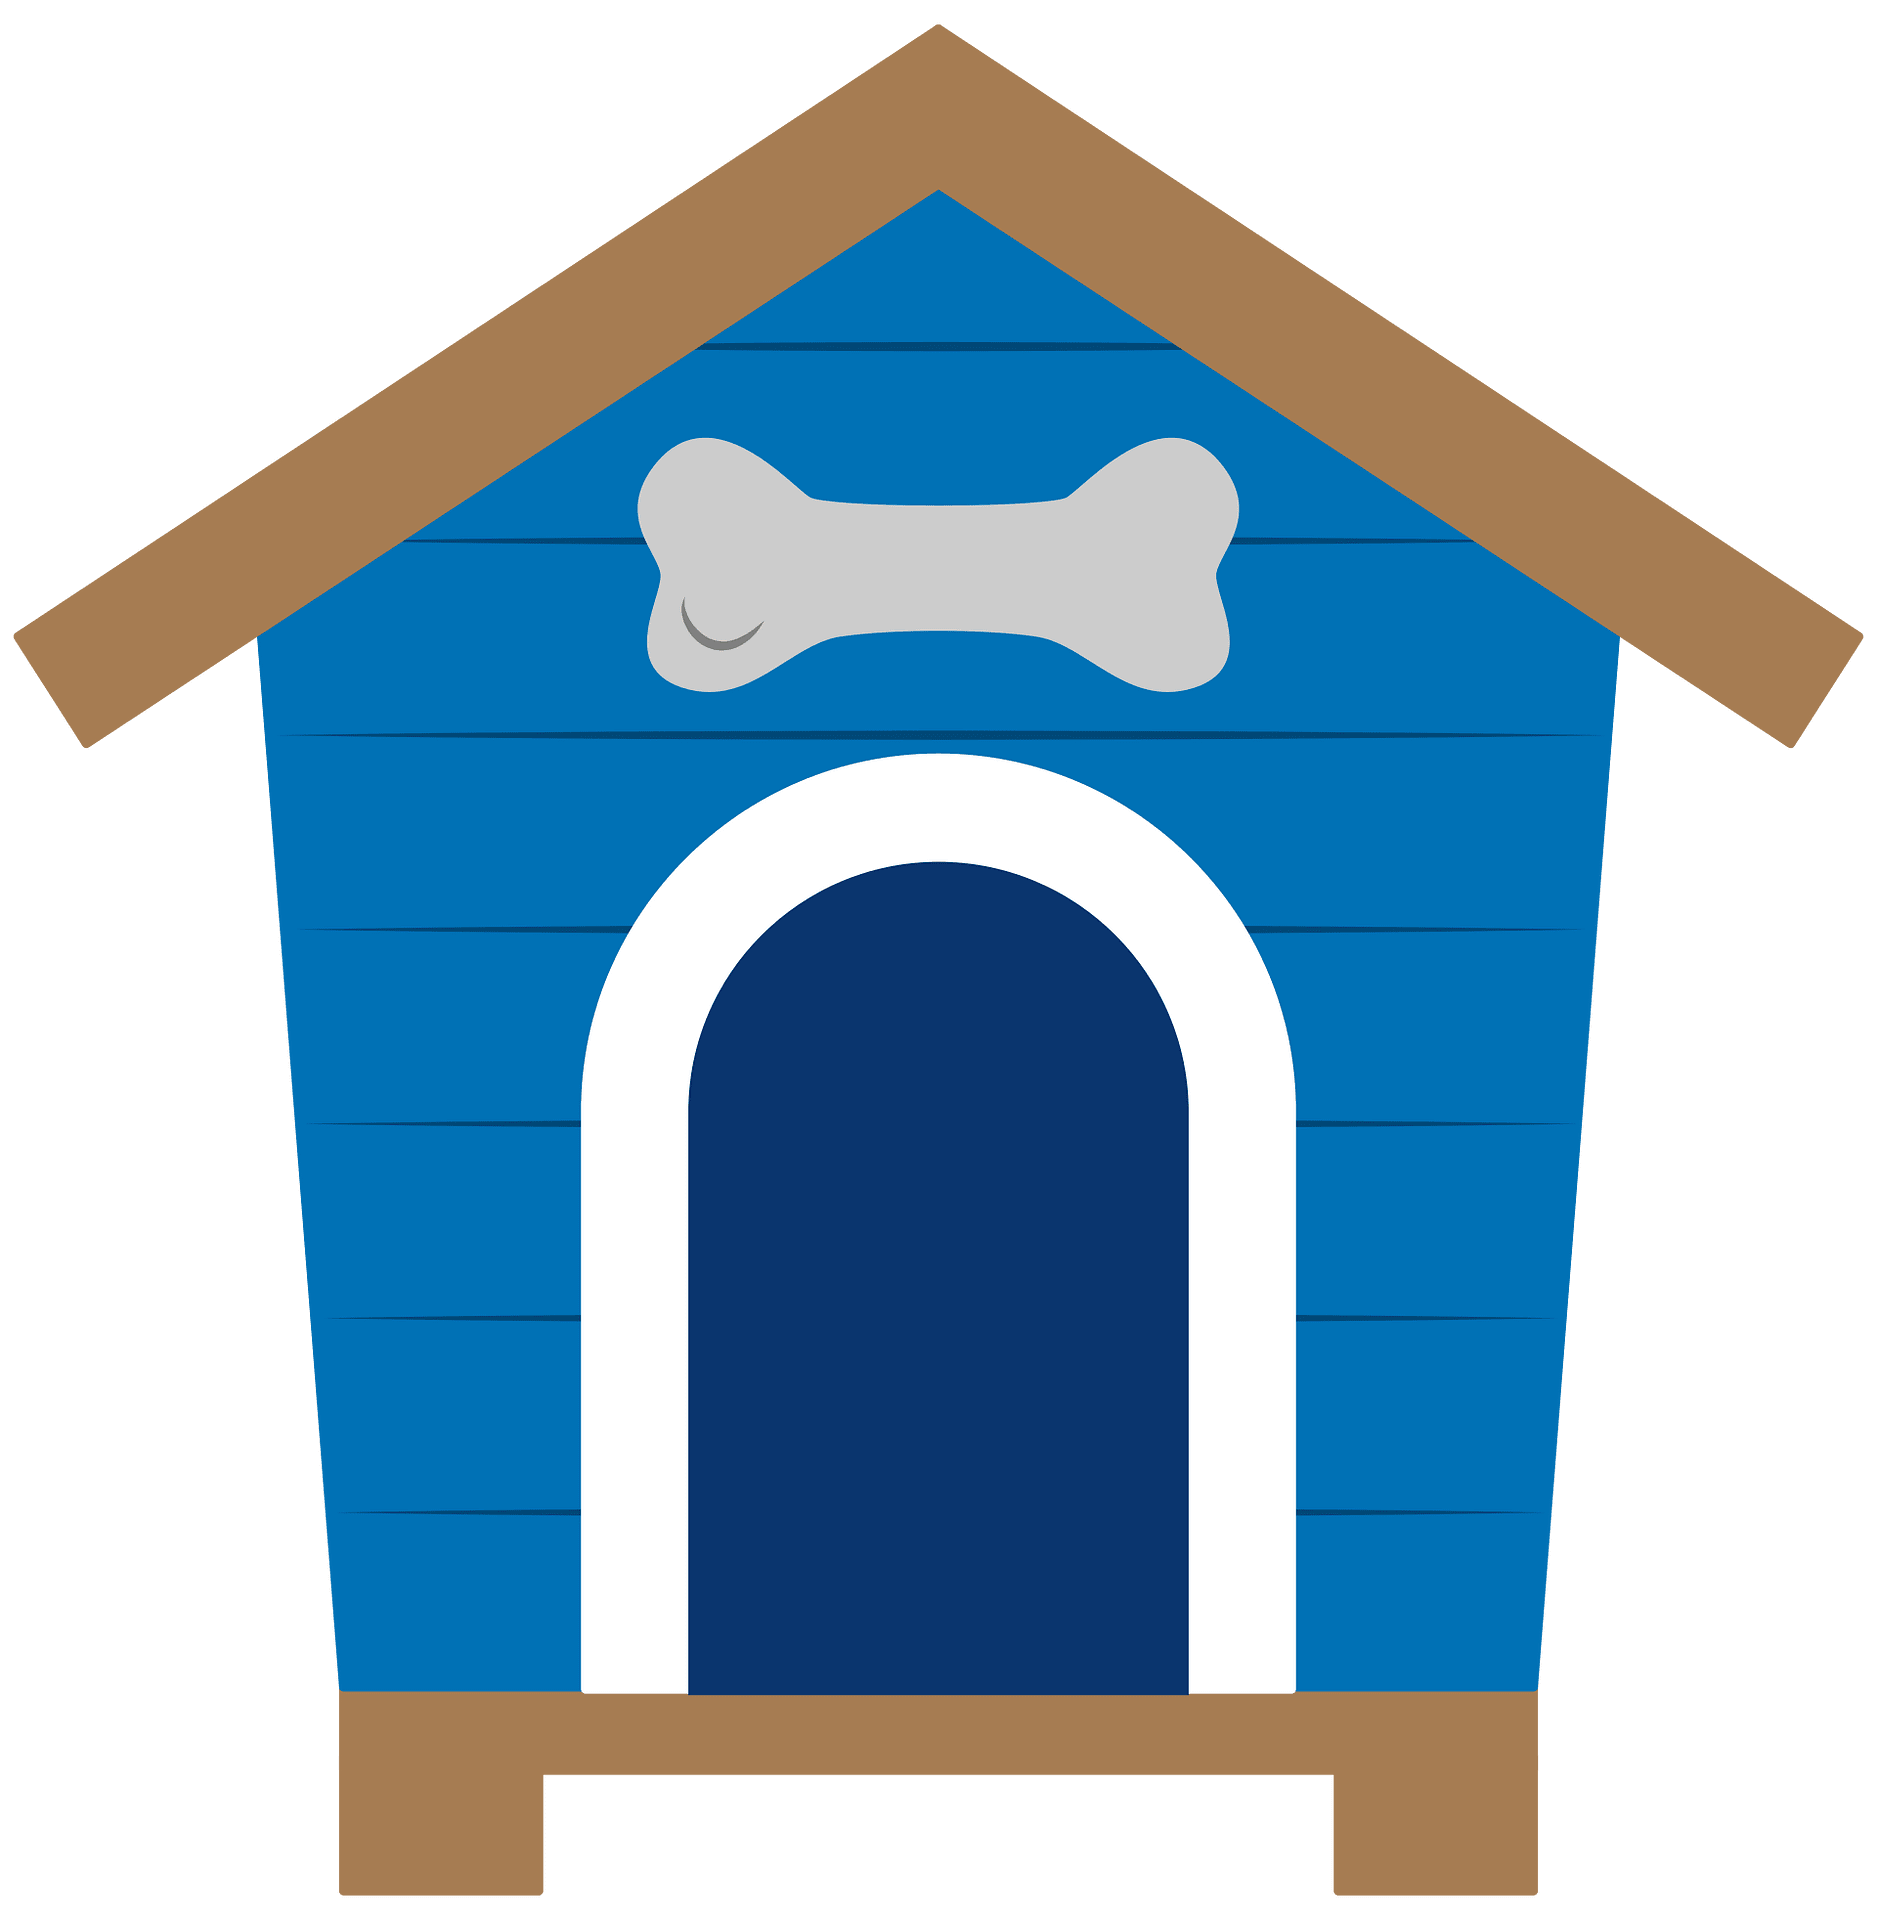 2-123-dog-house-clipart-images-stock-photos-vectors-shutterstock